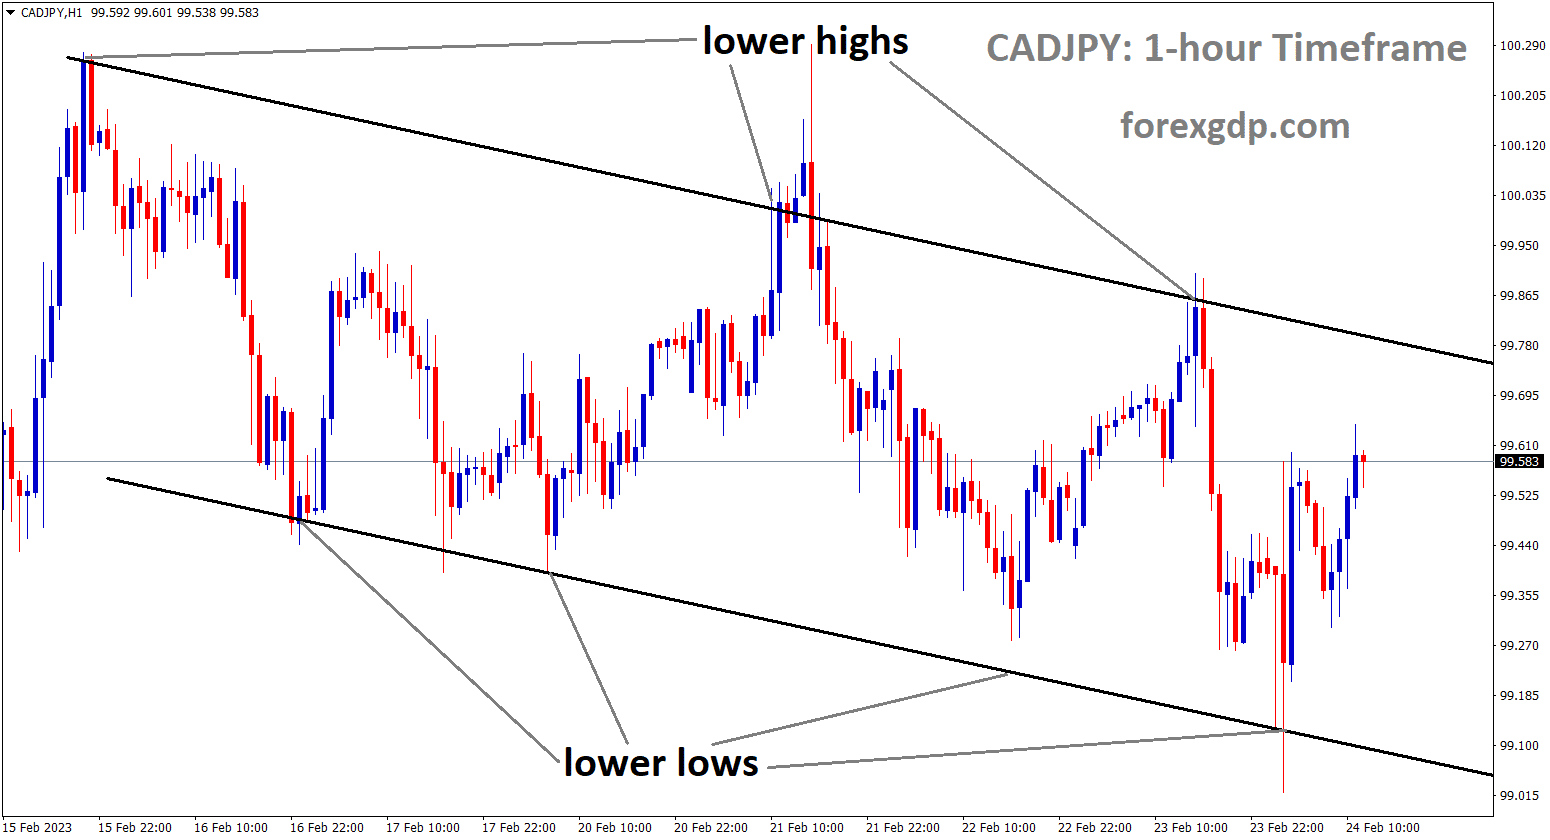 CADJPY is moving in Descending channel and the market has rebounded from the lower low area of the channel.